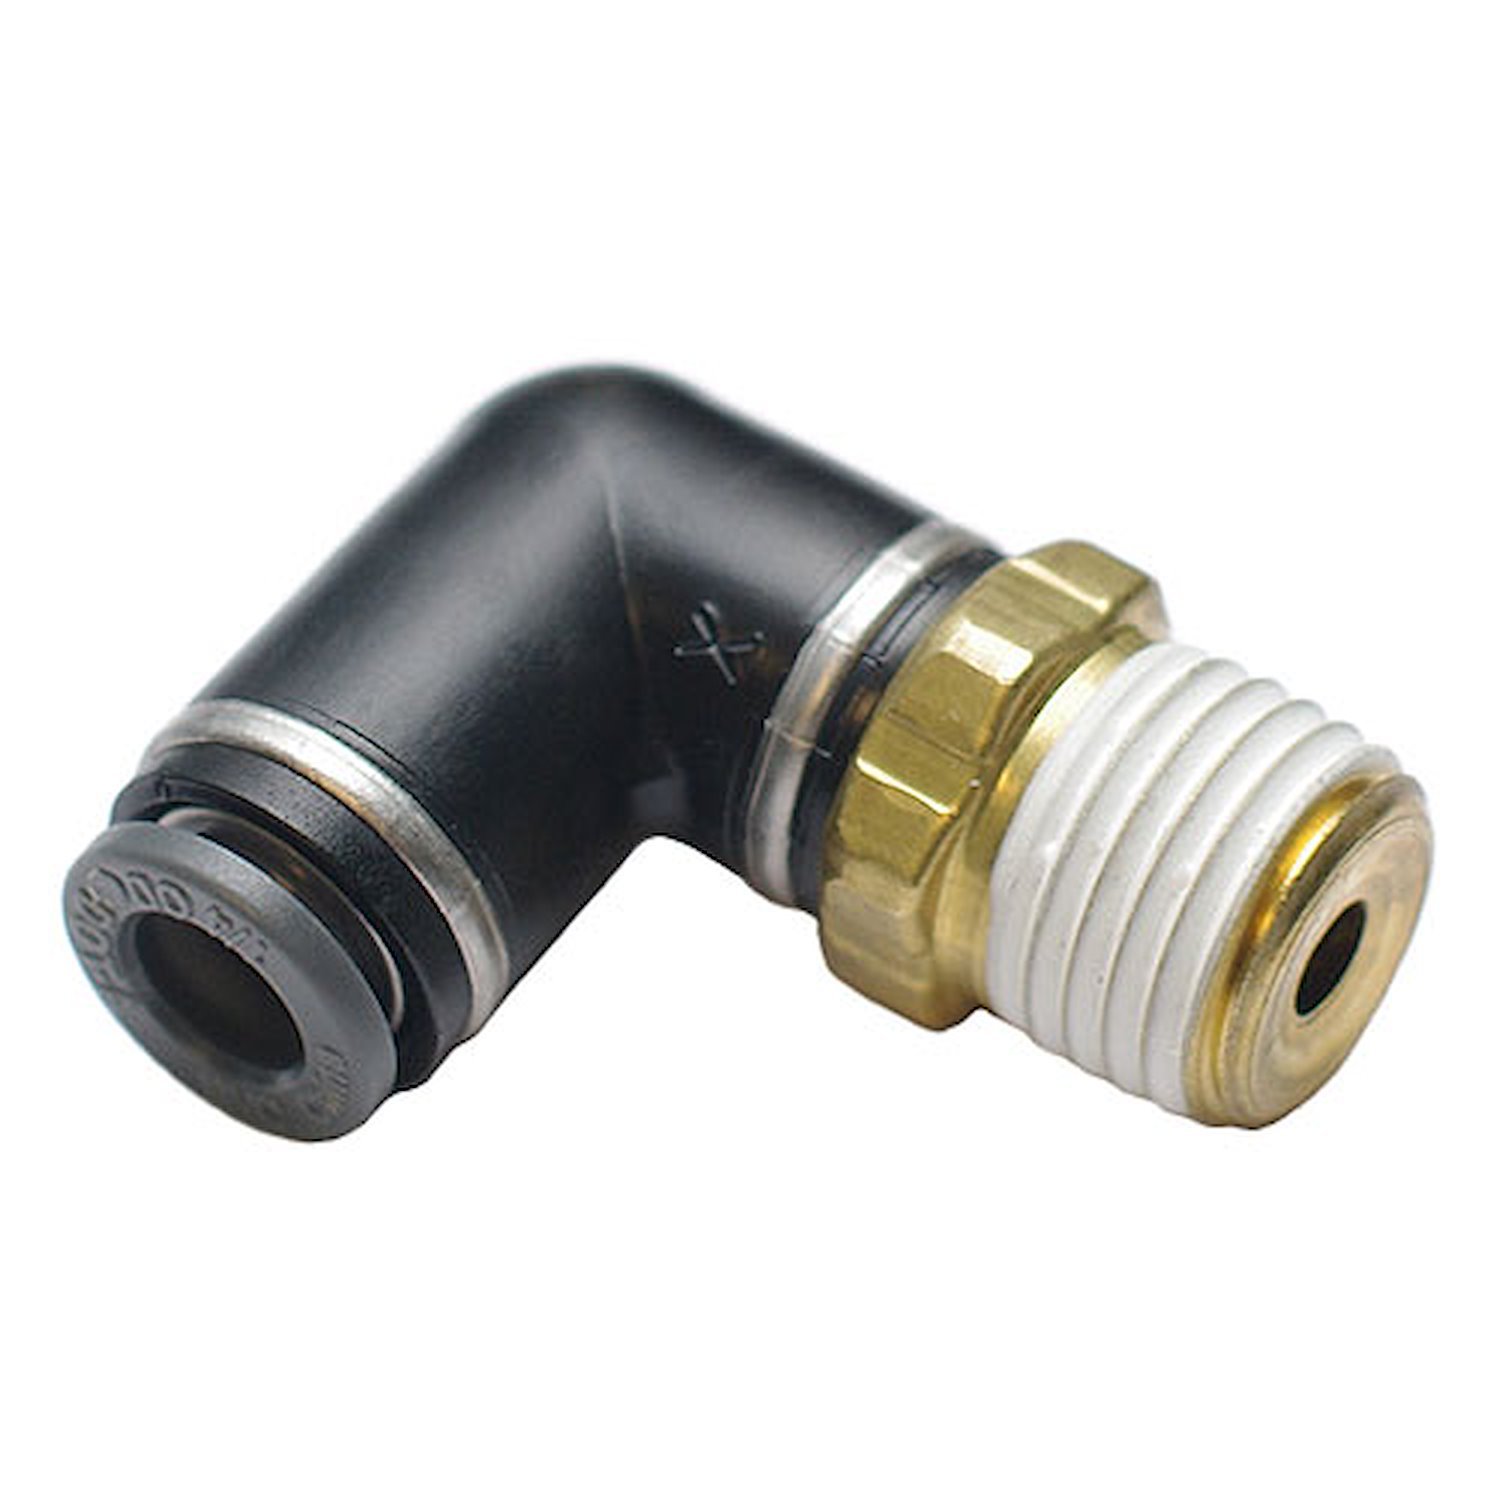 Airline Adapter Fitting 90 Degree Swivel 3/8 in. NPT Male to 1/4 in. Airline